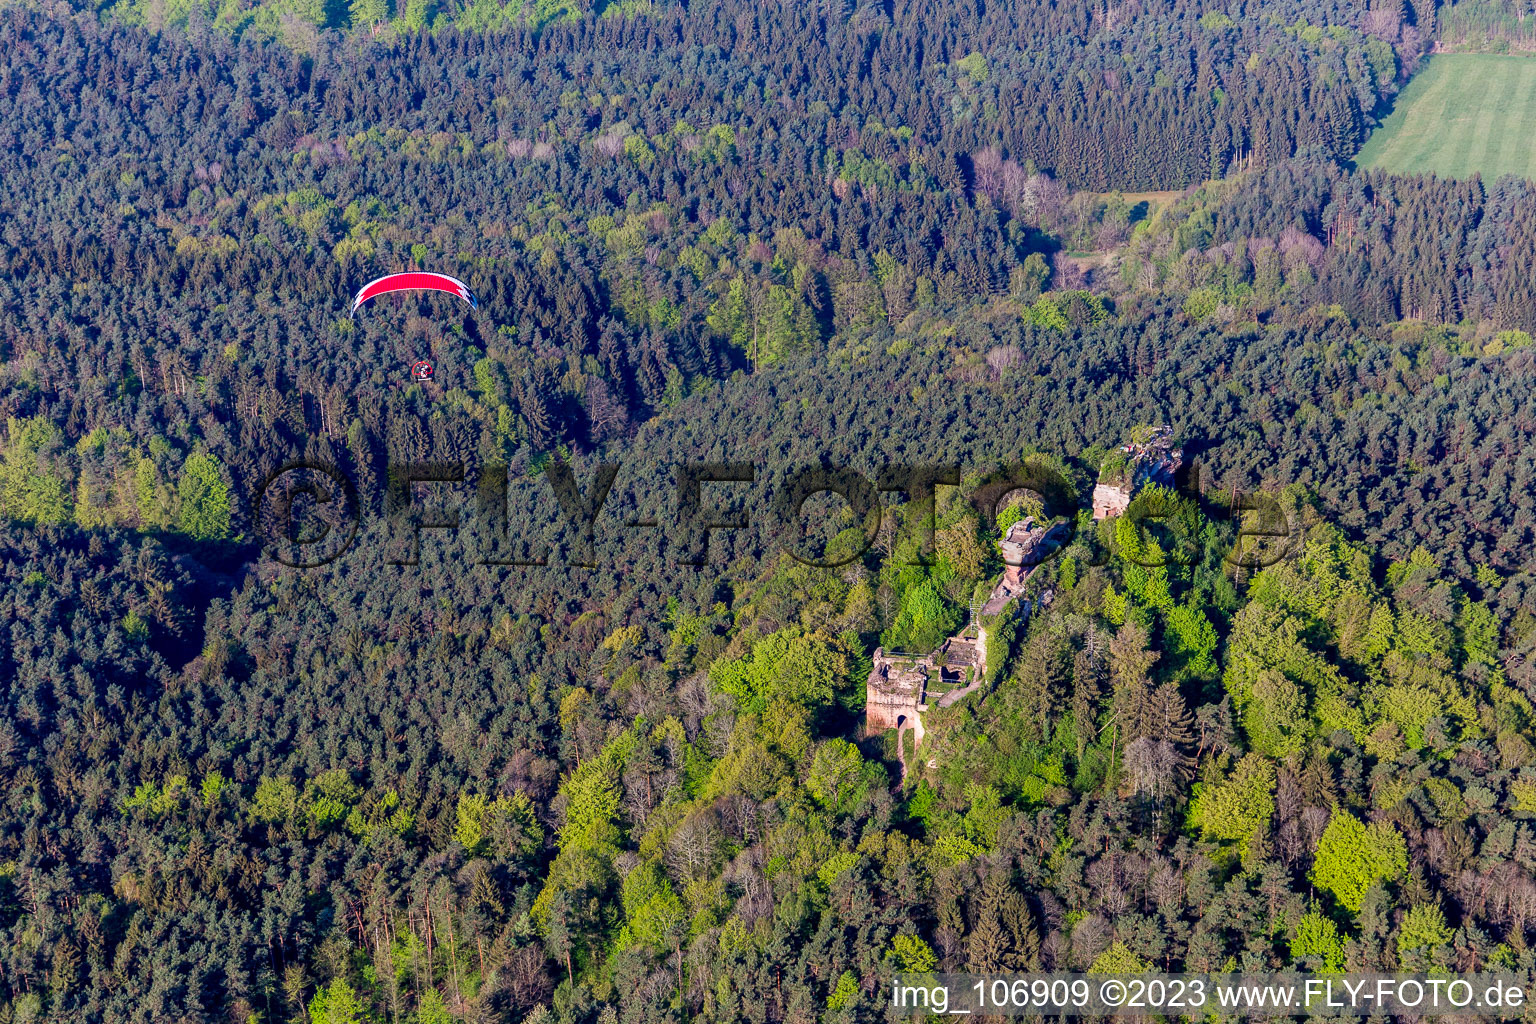 Aerial view of Drachenfels Castle in Busenberg in the state Rhineland-Palatinate, Germany